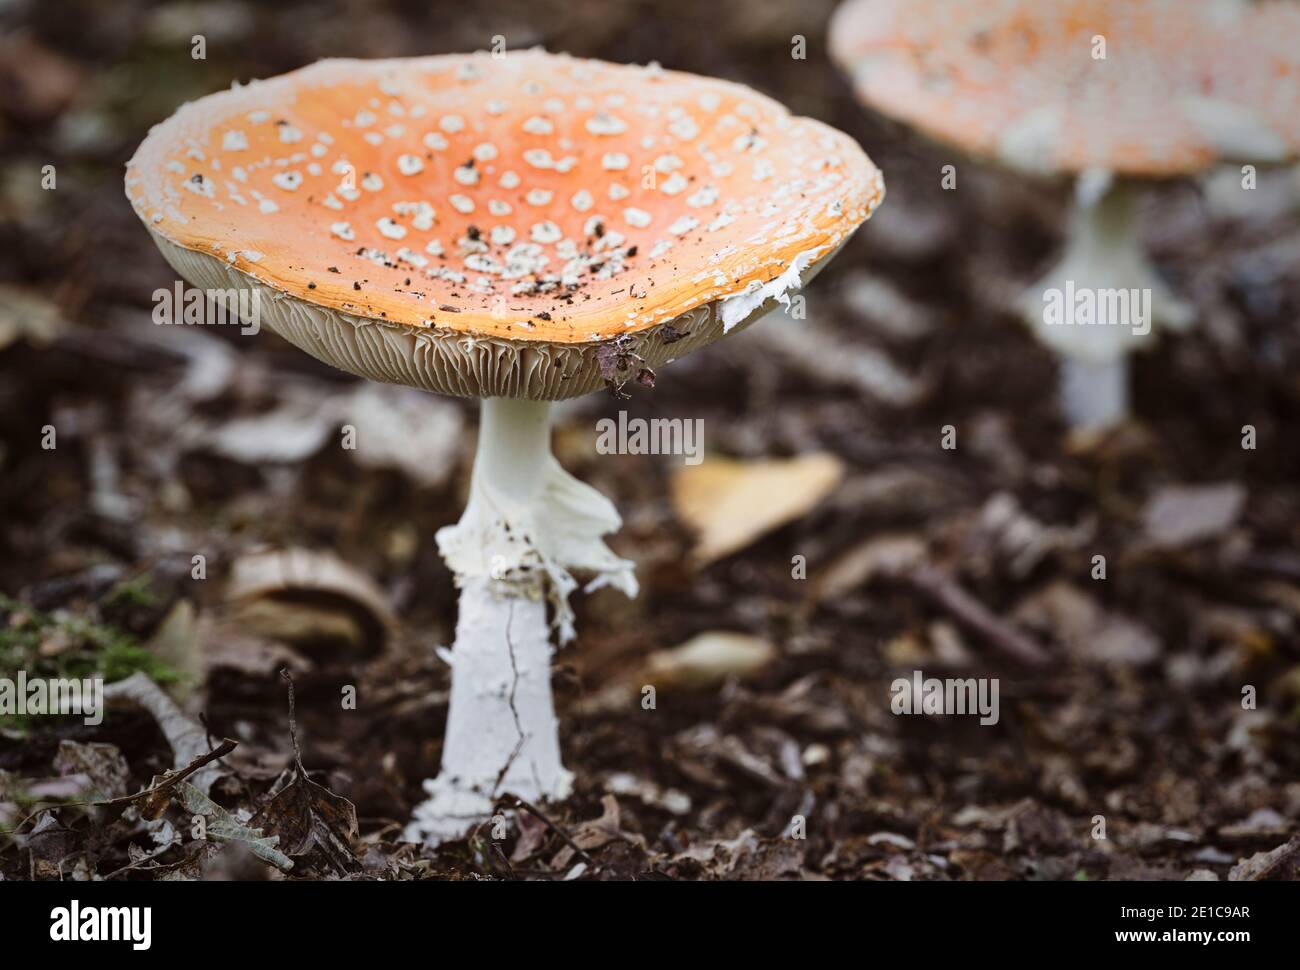 Amanita Muscaria / Fly Agaric ( aka Fly Amanita )  Fly argaric ( Fly Amanita ) mushrooms growing in the ancient Piddington woodland in Oxfordshire. Stock Photo